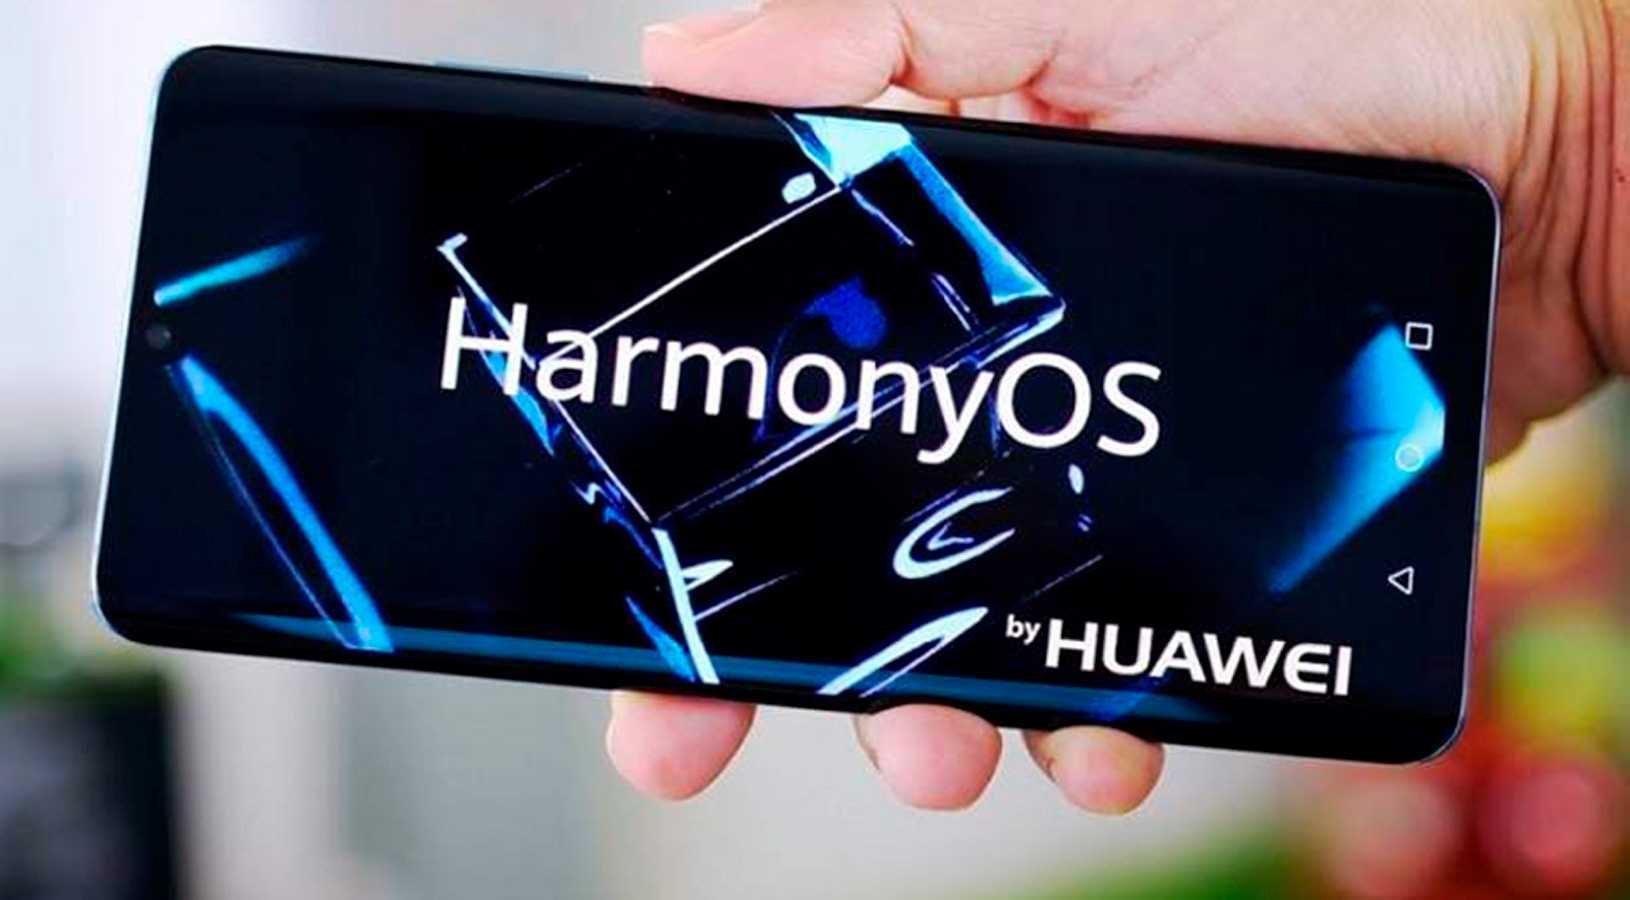 Harmony os от huawei — на самом деле android?